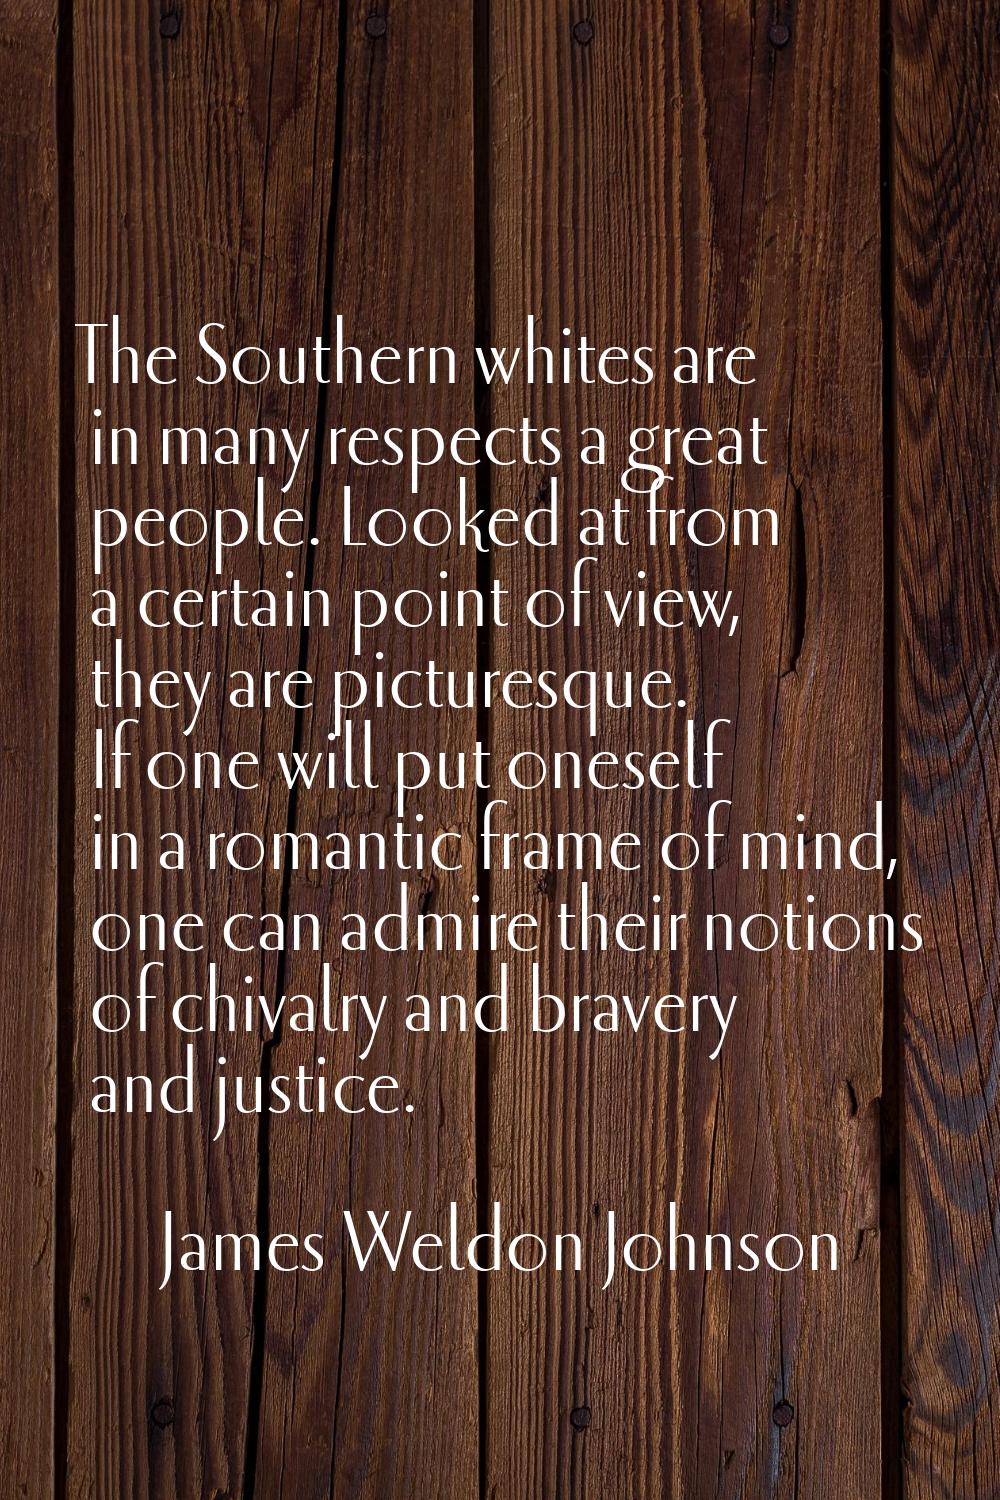 The Southern whites are in many respects a great people. Looked at from a certain point of view, th